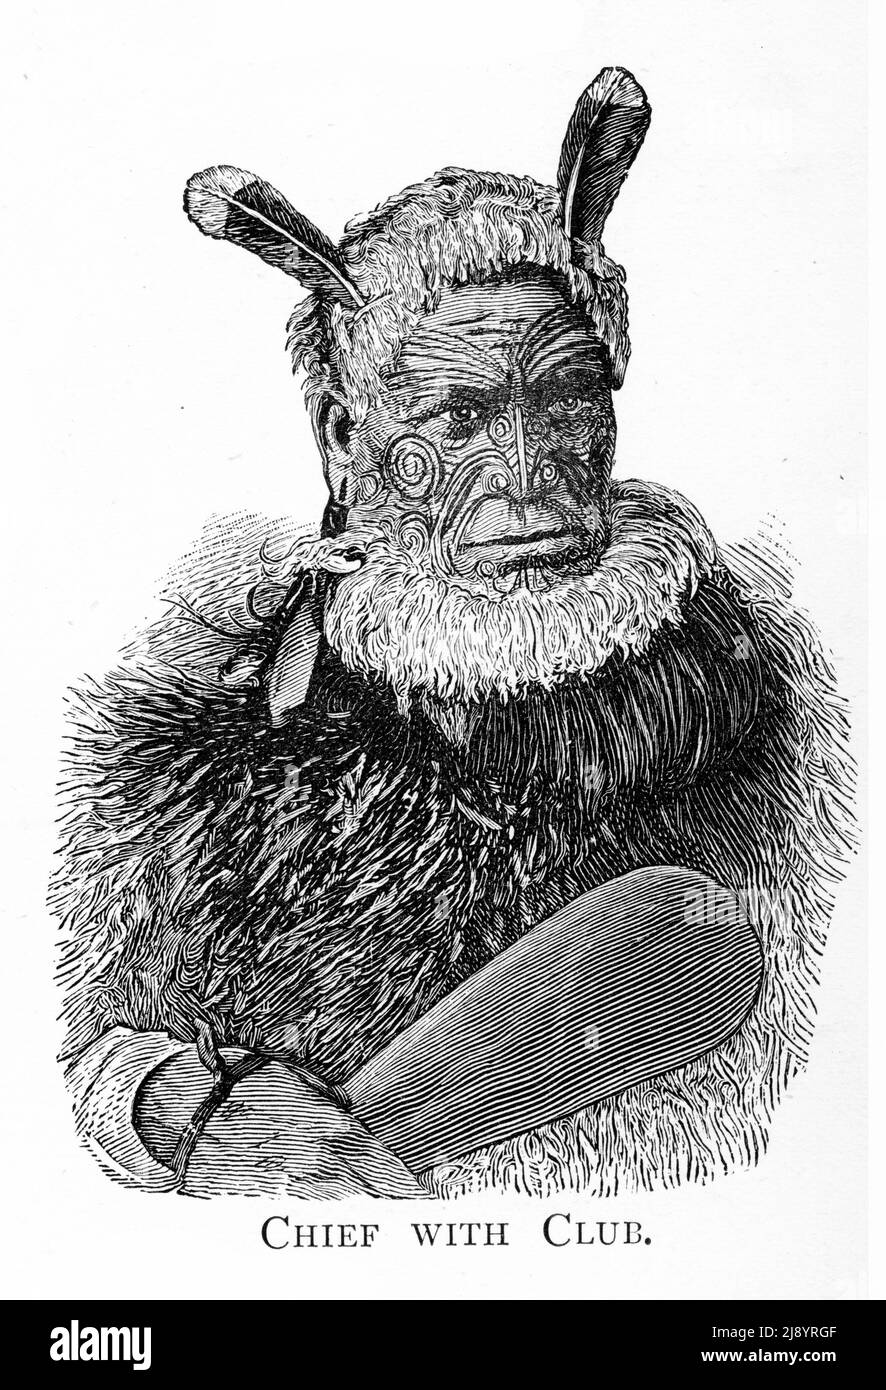 Engraved portrait of a Maori chief with war club Stock Photo